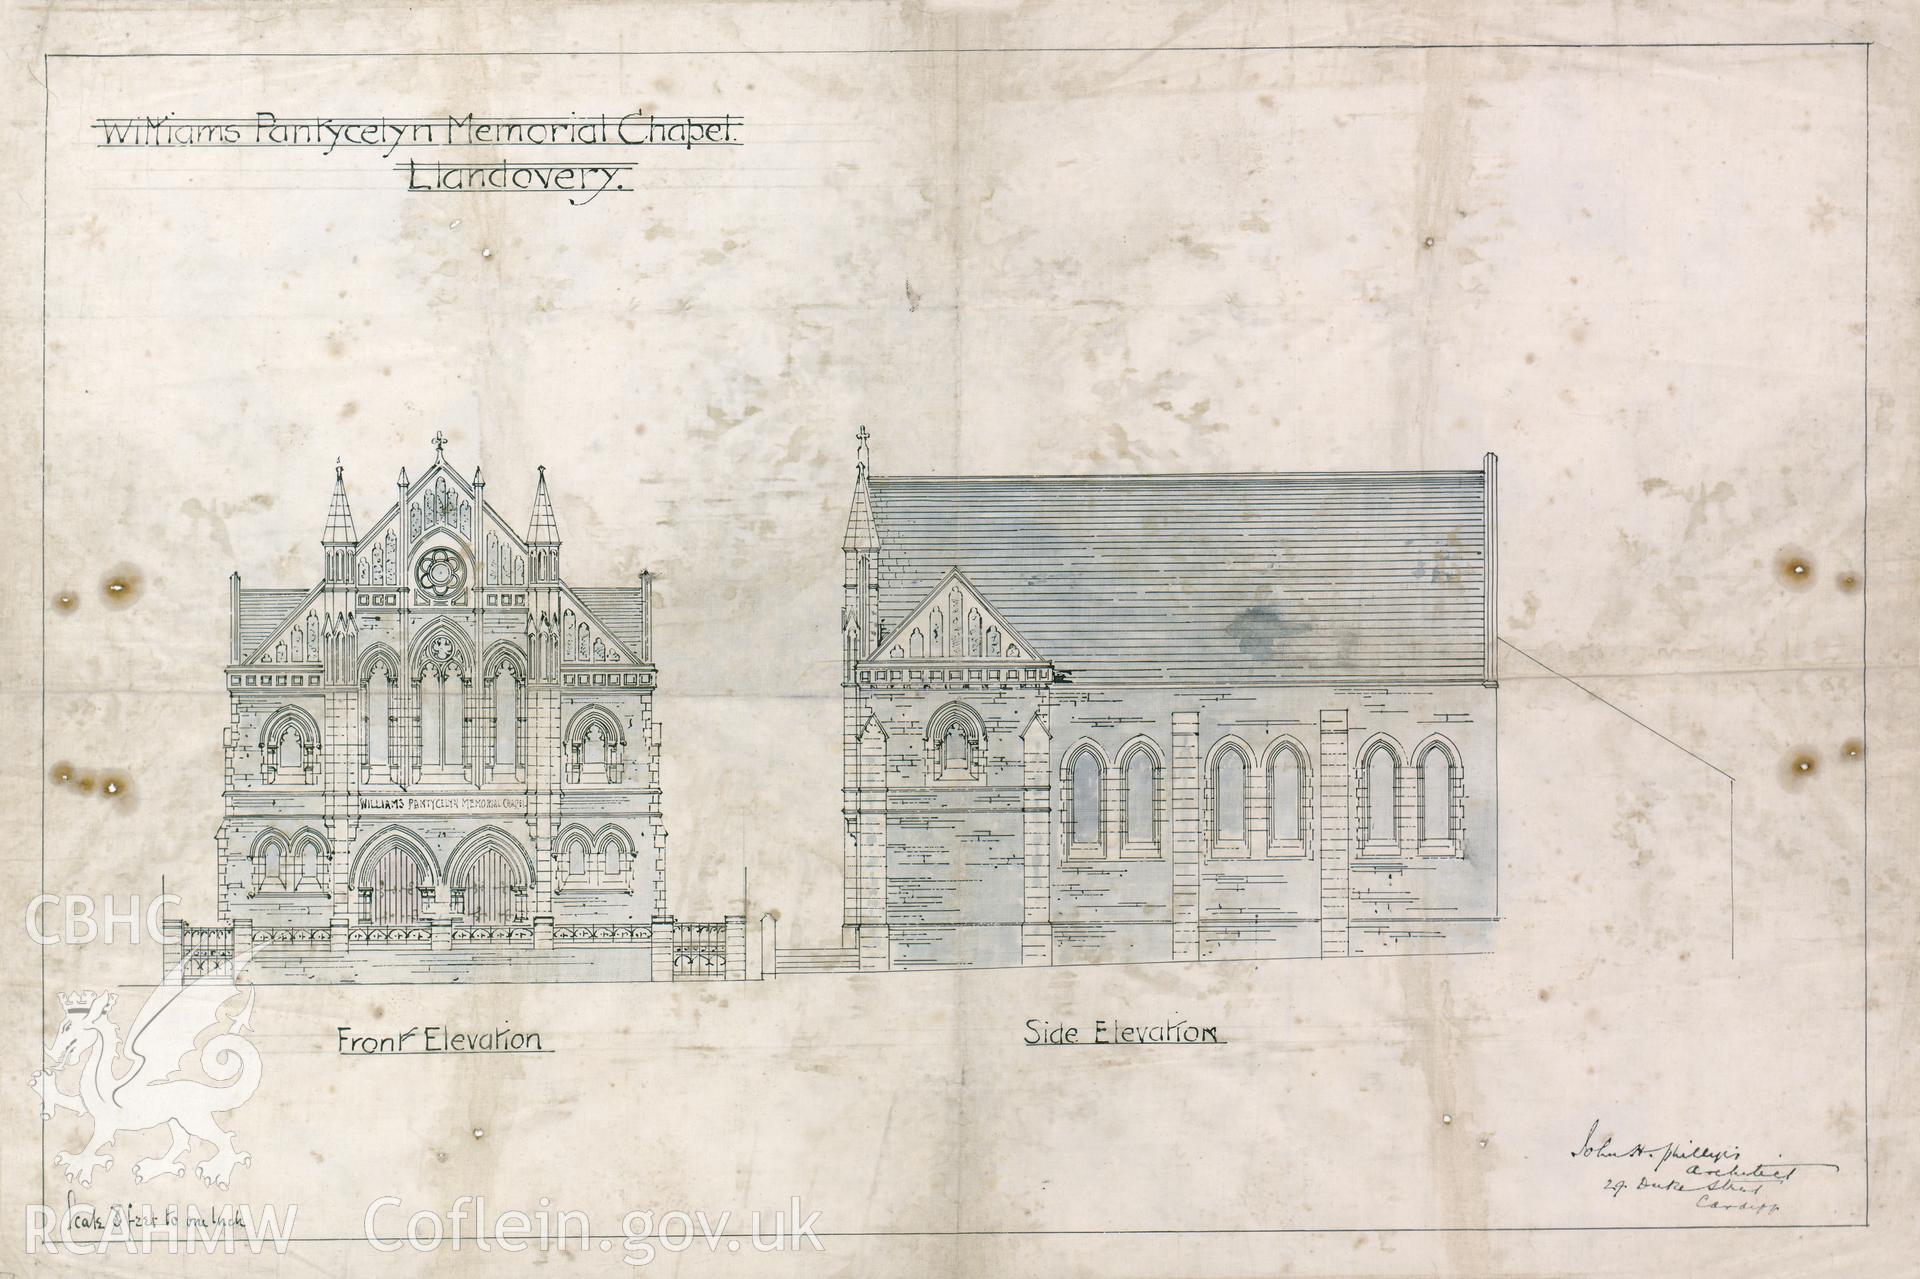 Measured elevation drawings of Williams Pantycelyn Chapel, dated 1886.